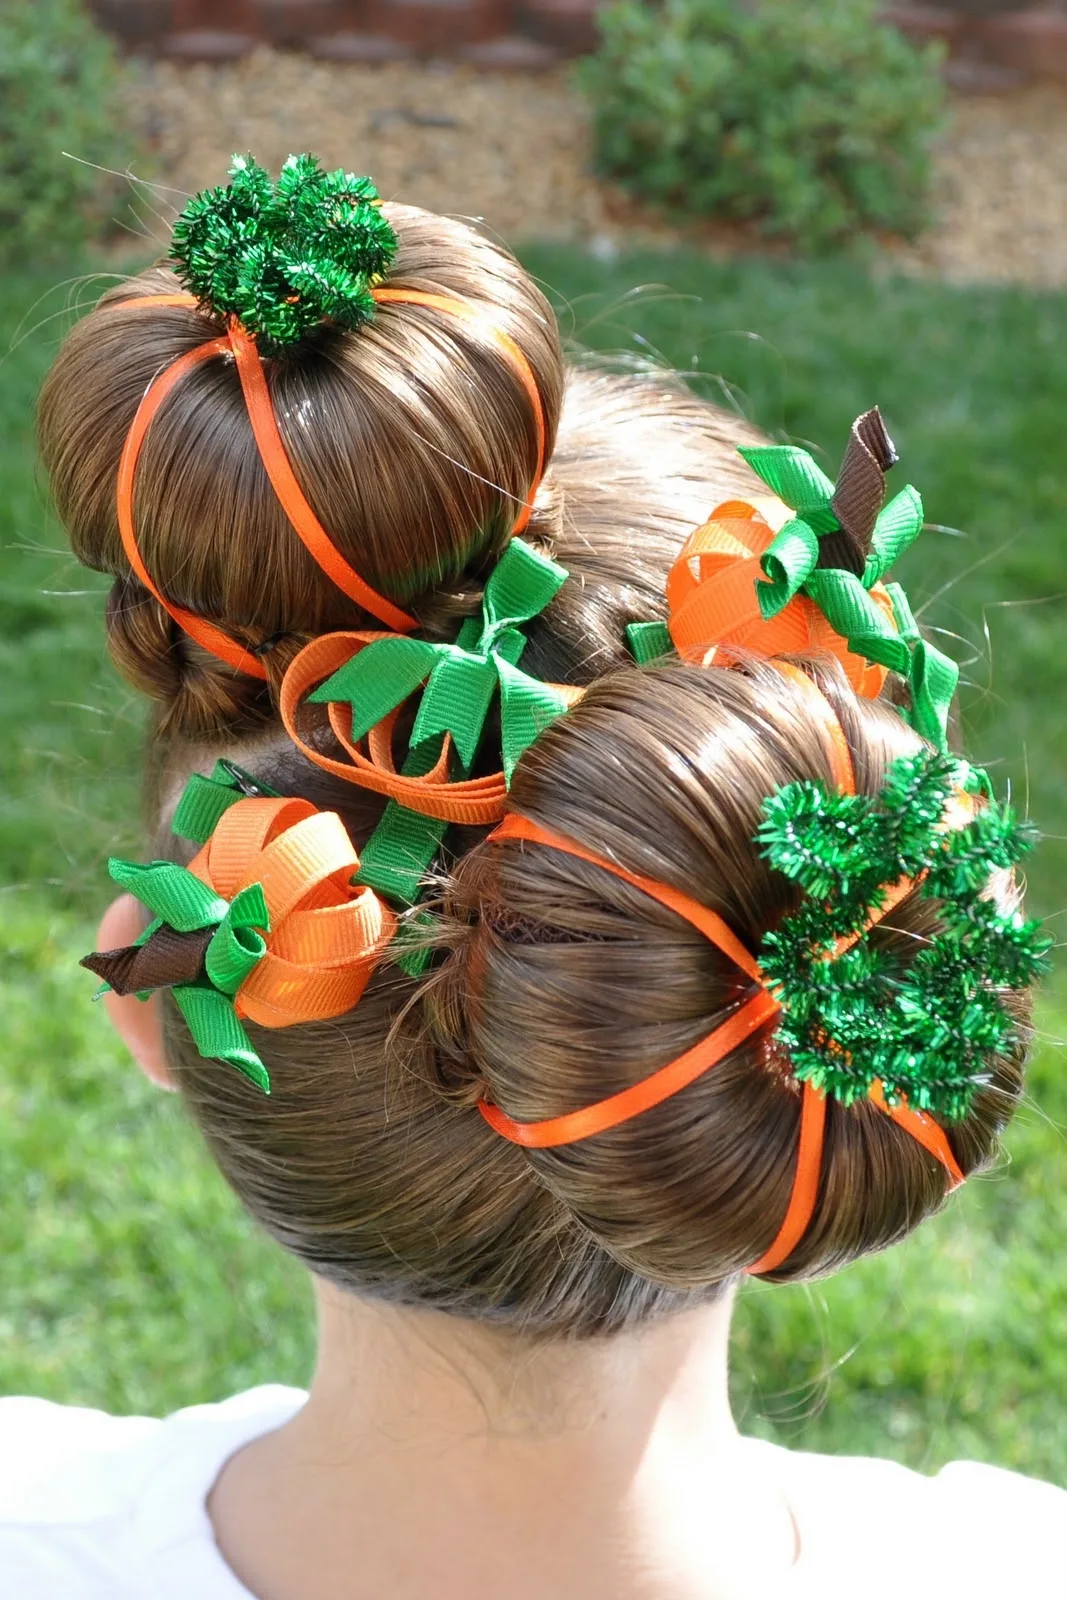 Double pumpkin buns for a halloween hairstyle or crazy hair day.